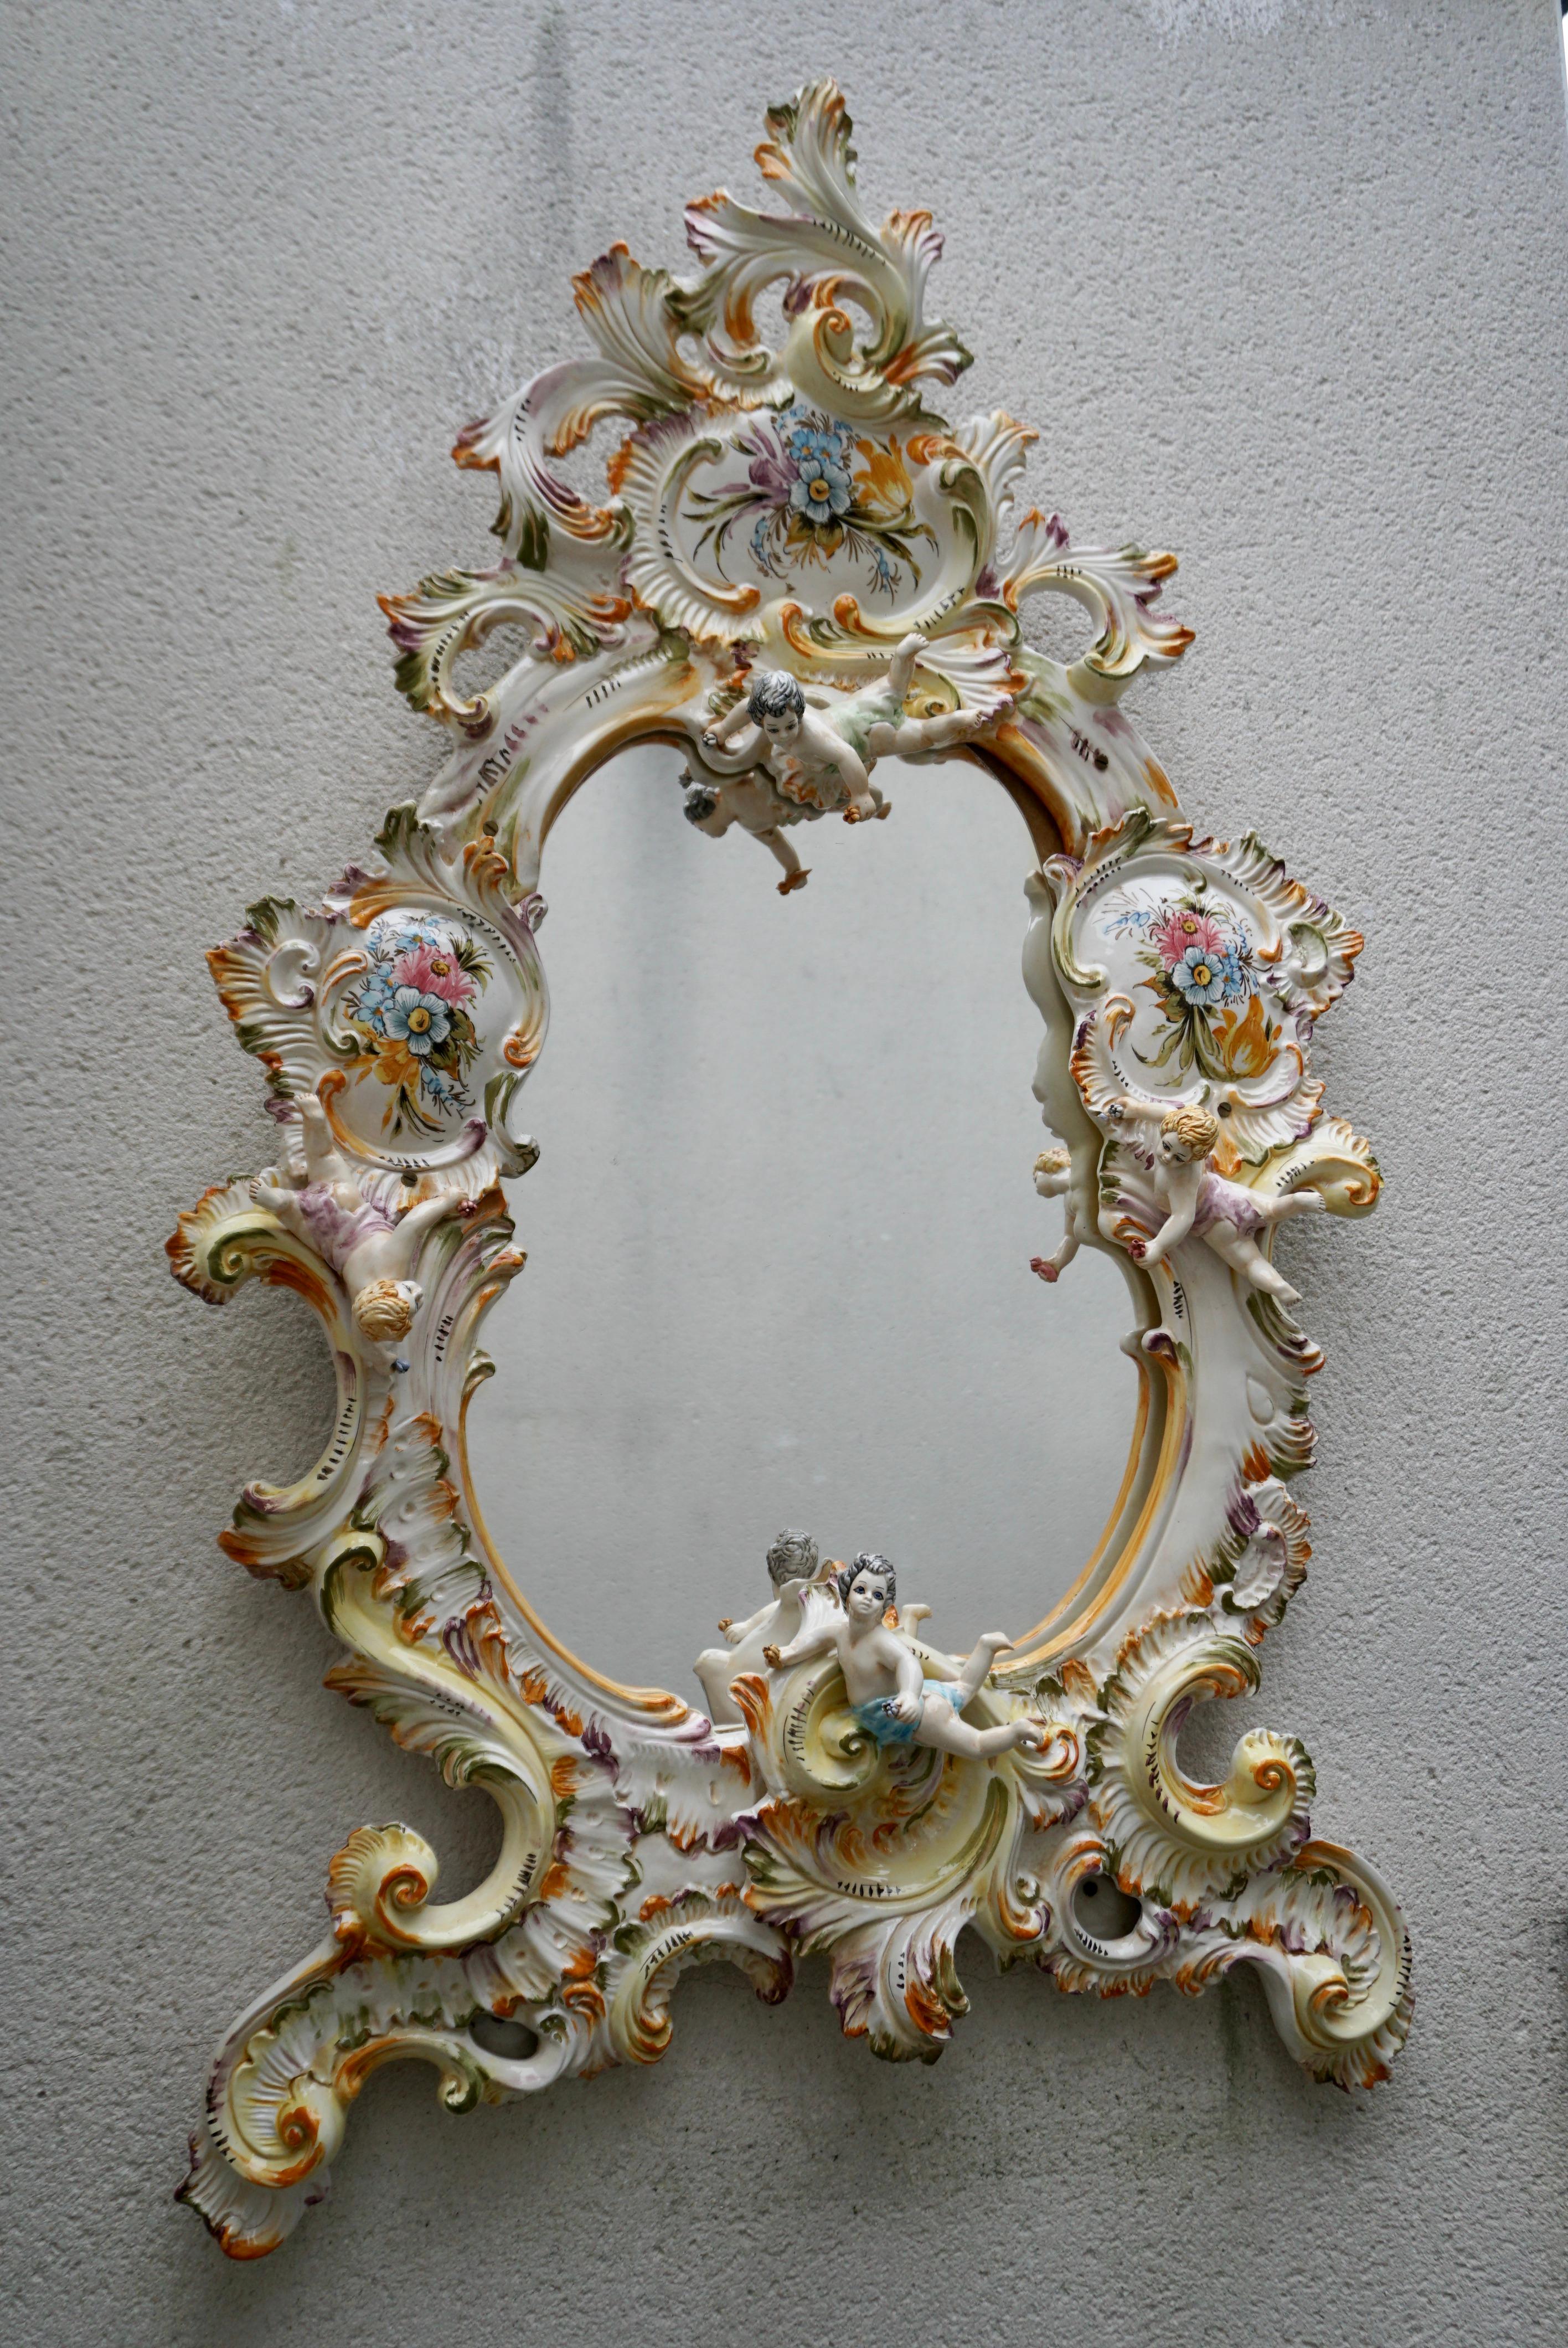 Mid-20th Century Italian Capodimonte Porcelain Mirror with Flowers and Cherubs In Good Condition For Sale In Antwerp, BE